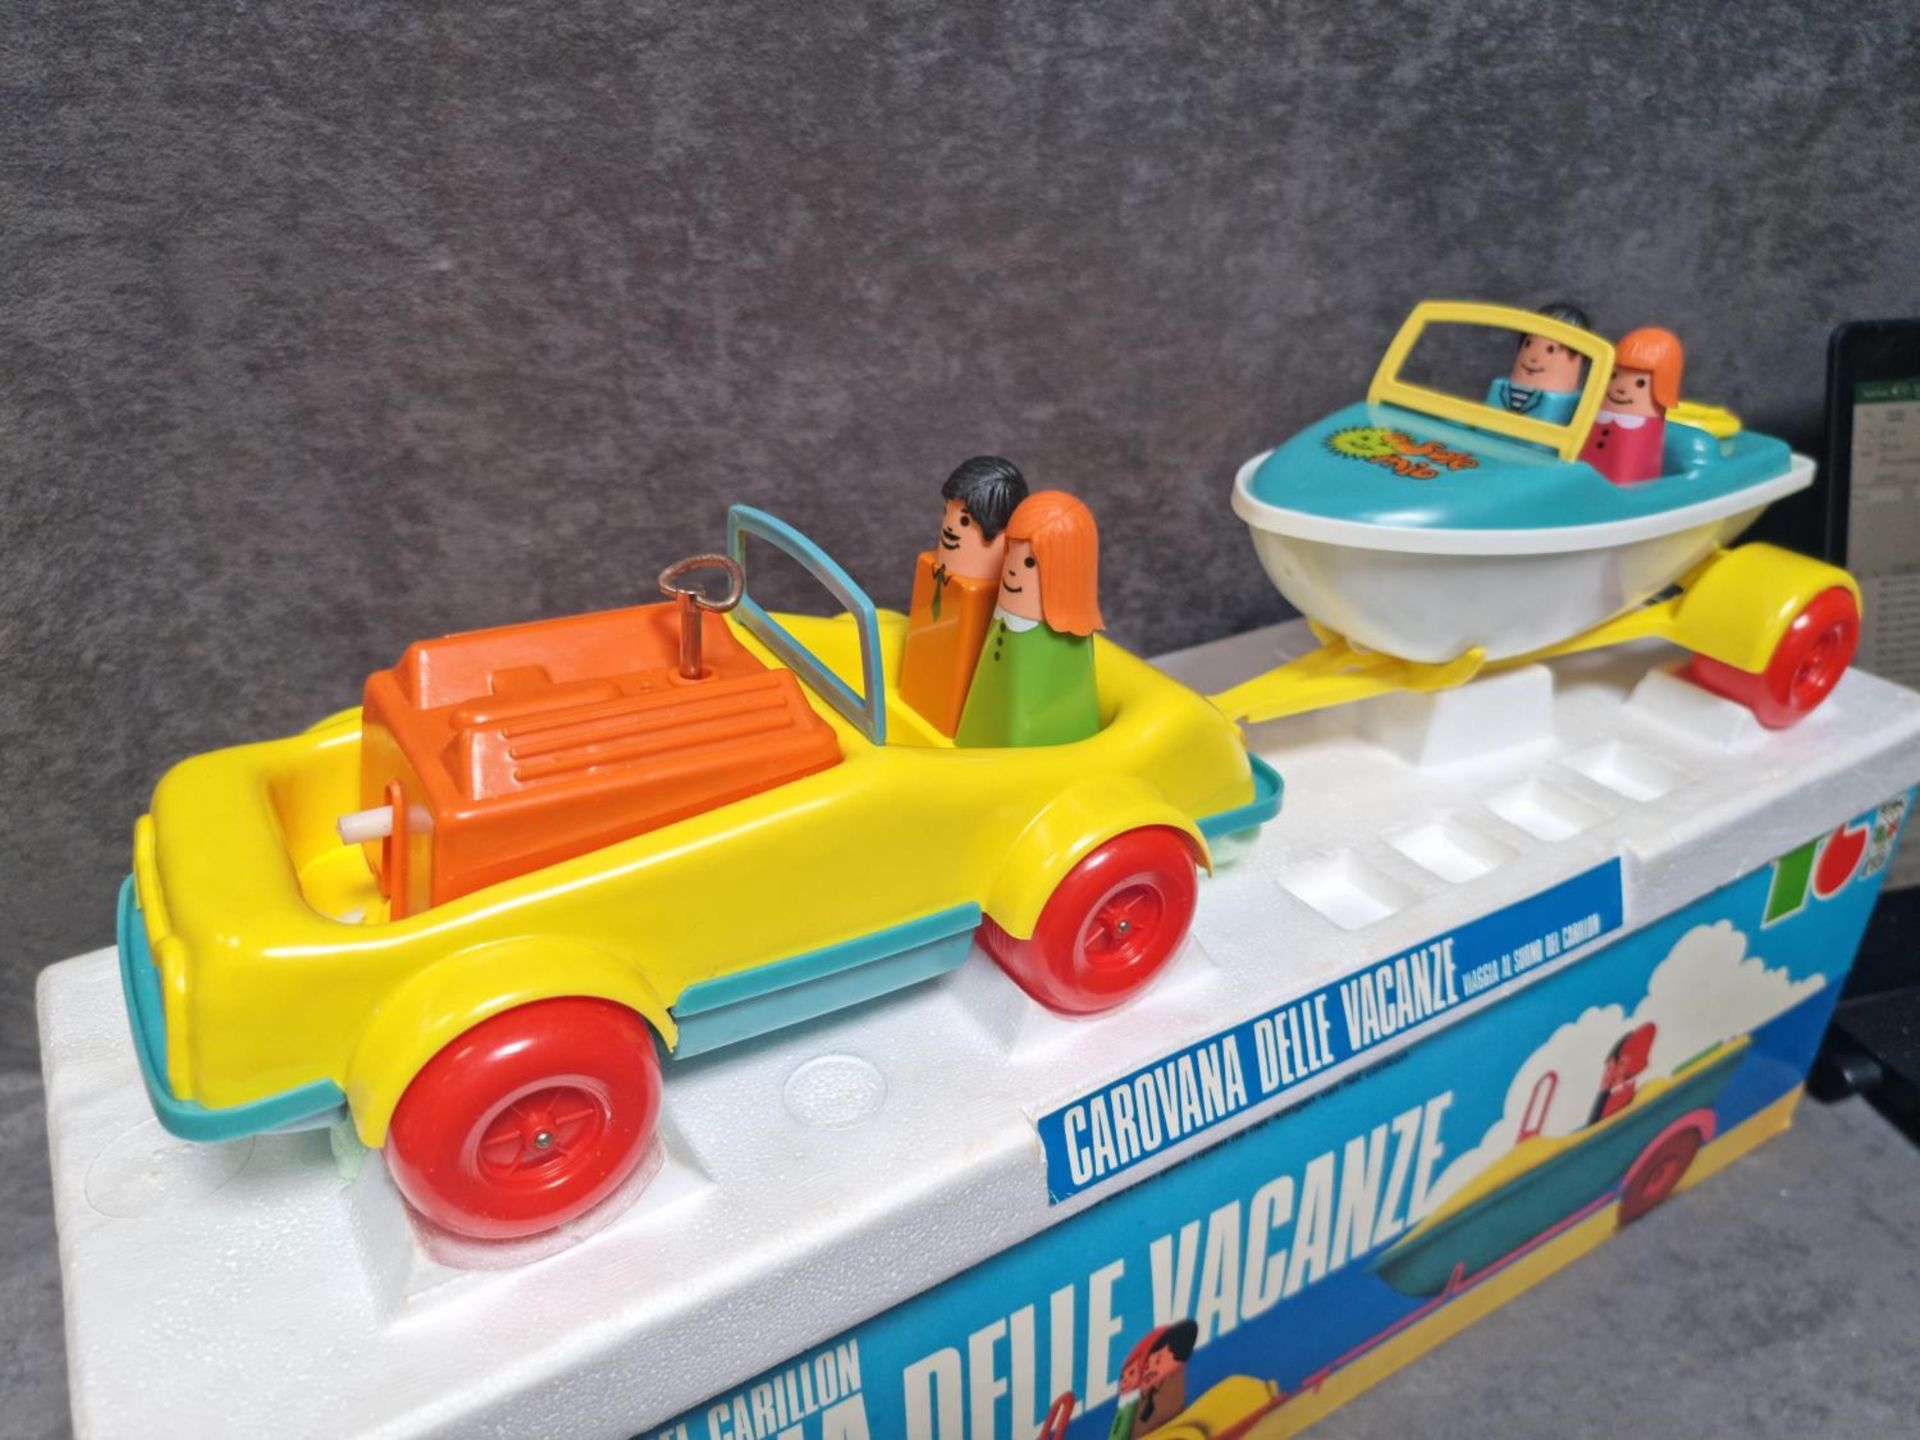 Clockwork Musical Car And Boat Vintage Set By Sebino Toys Spain Carovana Delle Vacanze 1980s Viaggia - Image 2 of 2